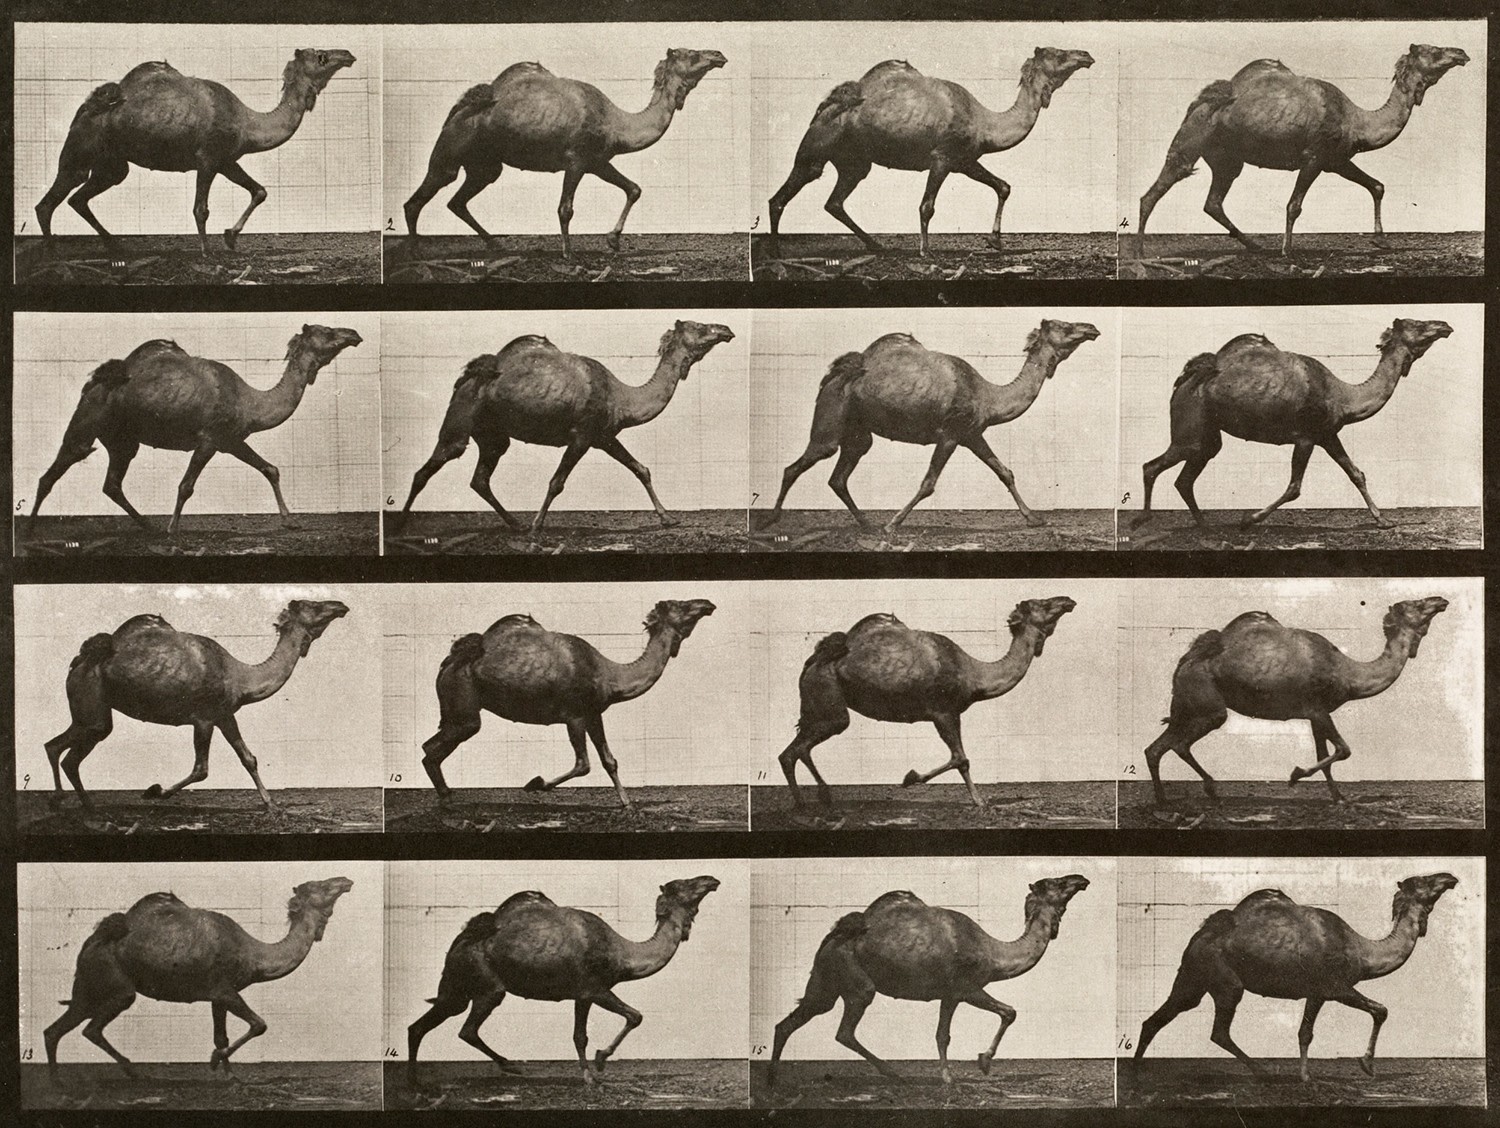 Sequence of black and white photos showing the movements of a walking camel